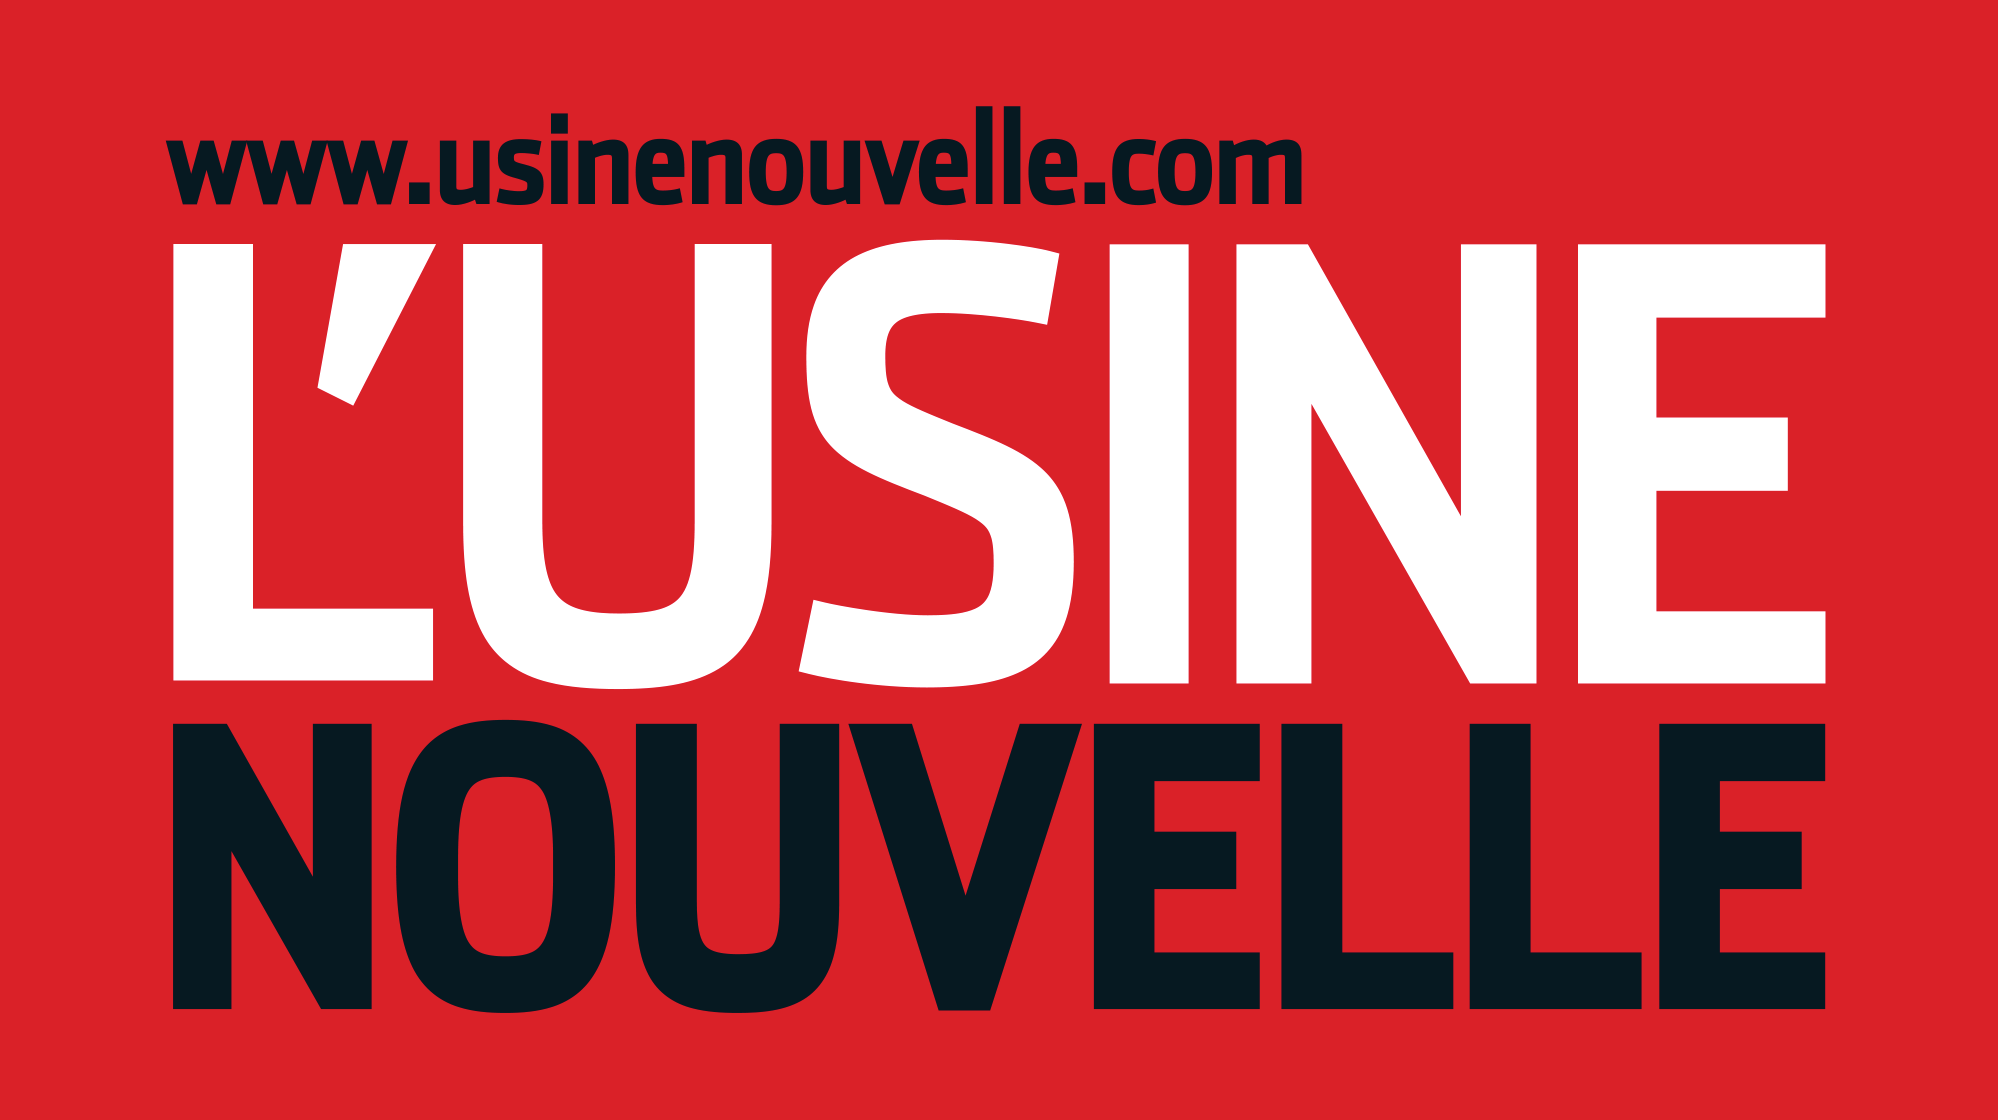 USINENOUVELLE.com is the leader in professional B2B information